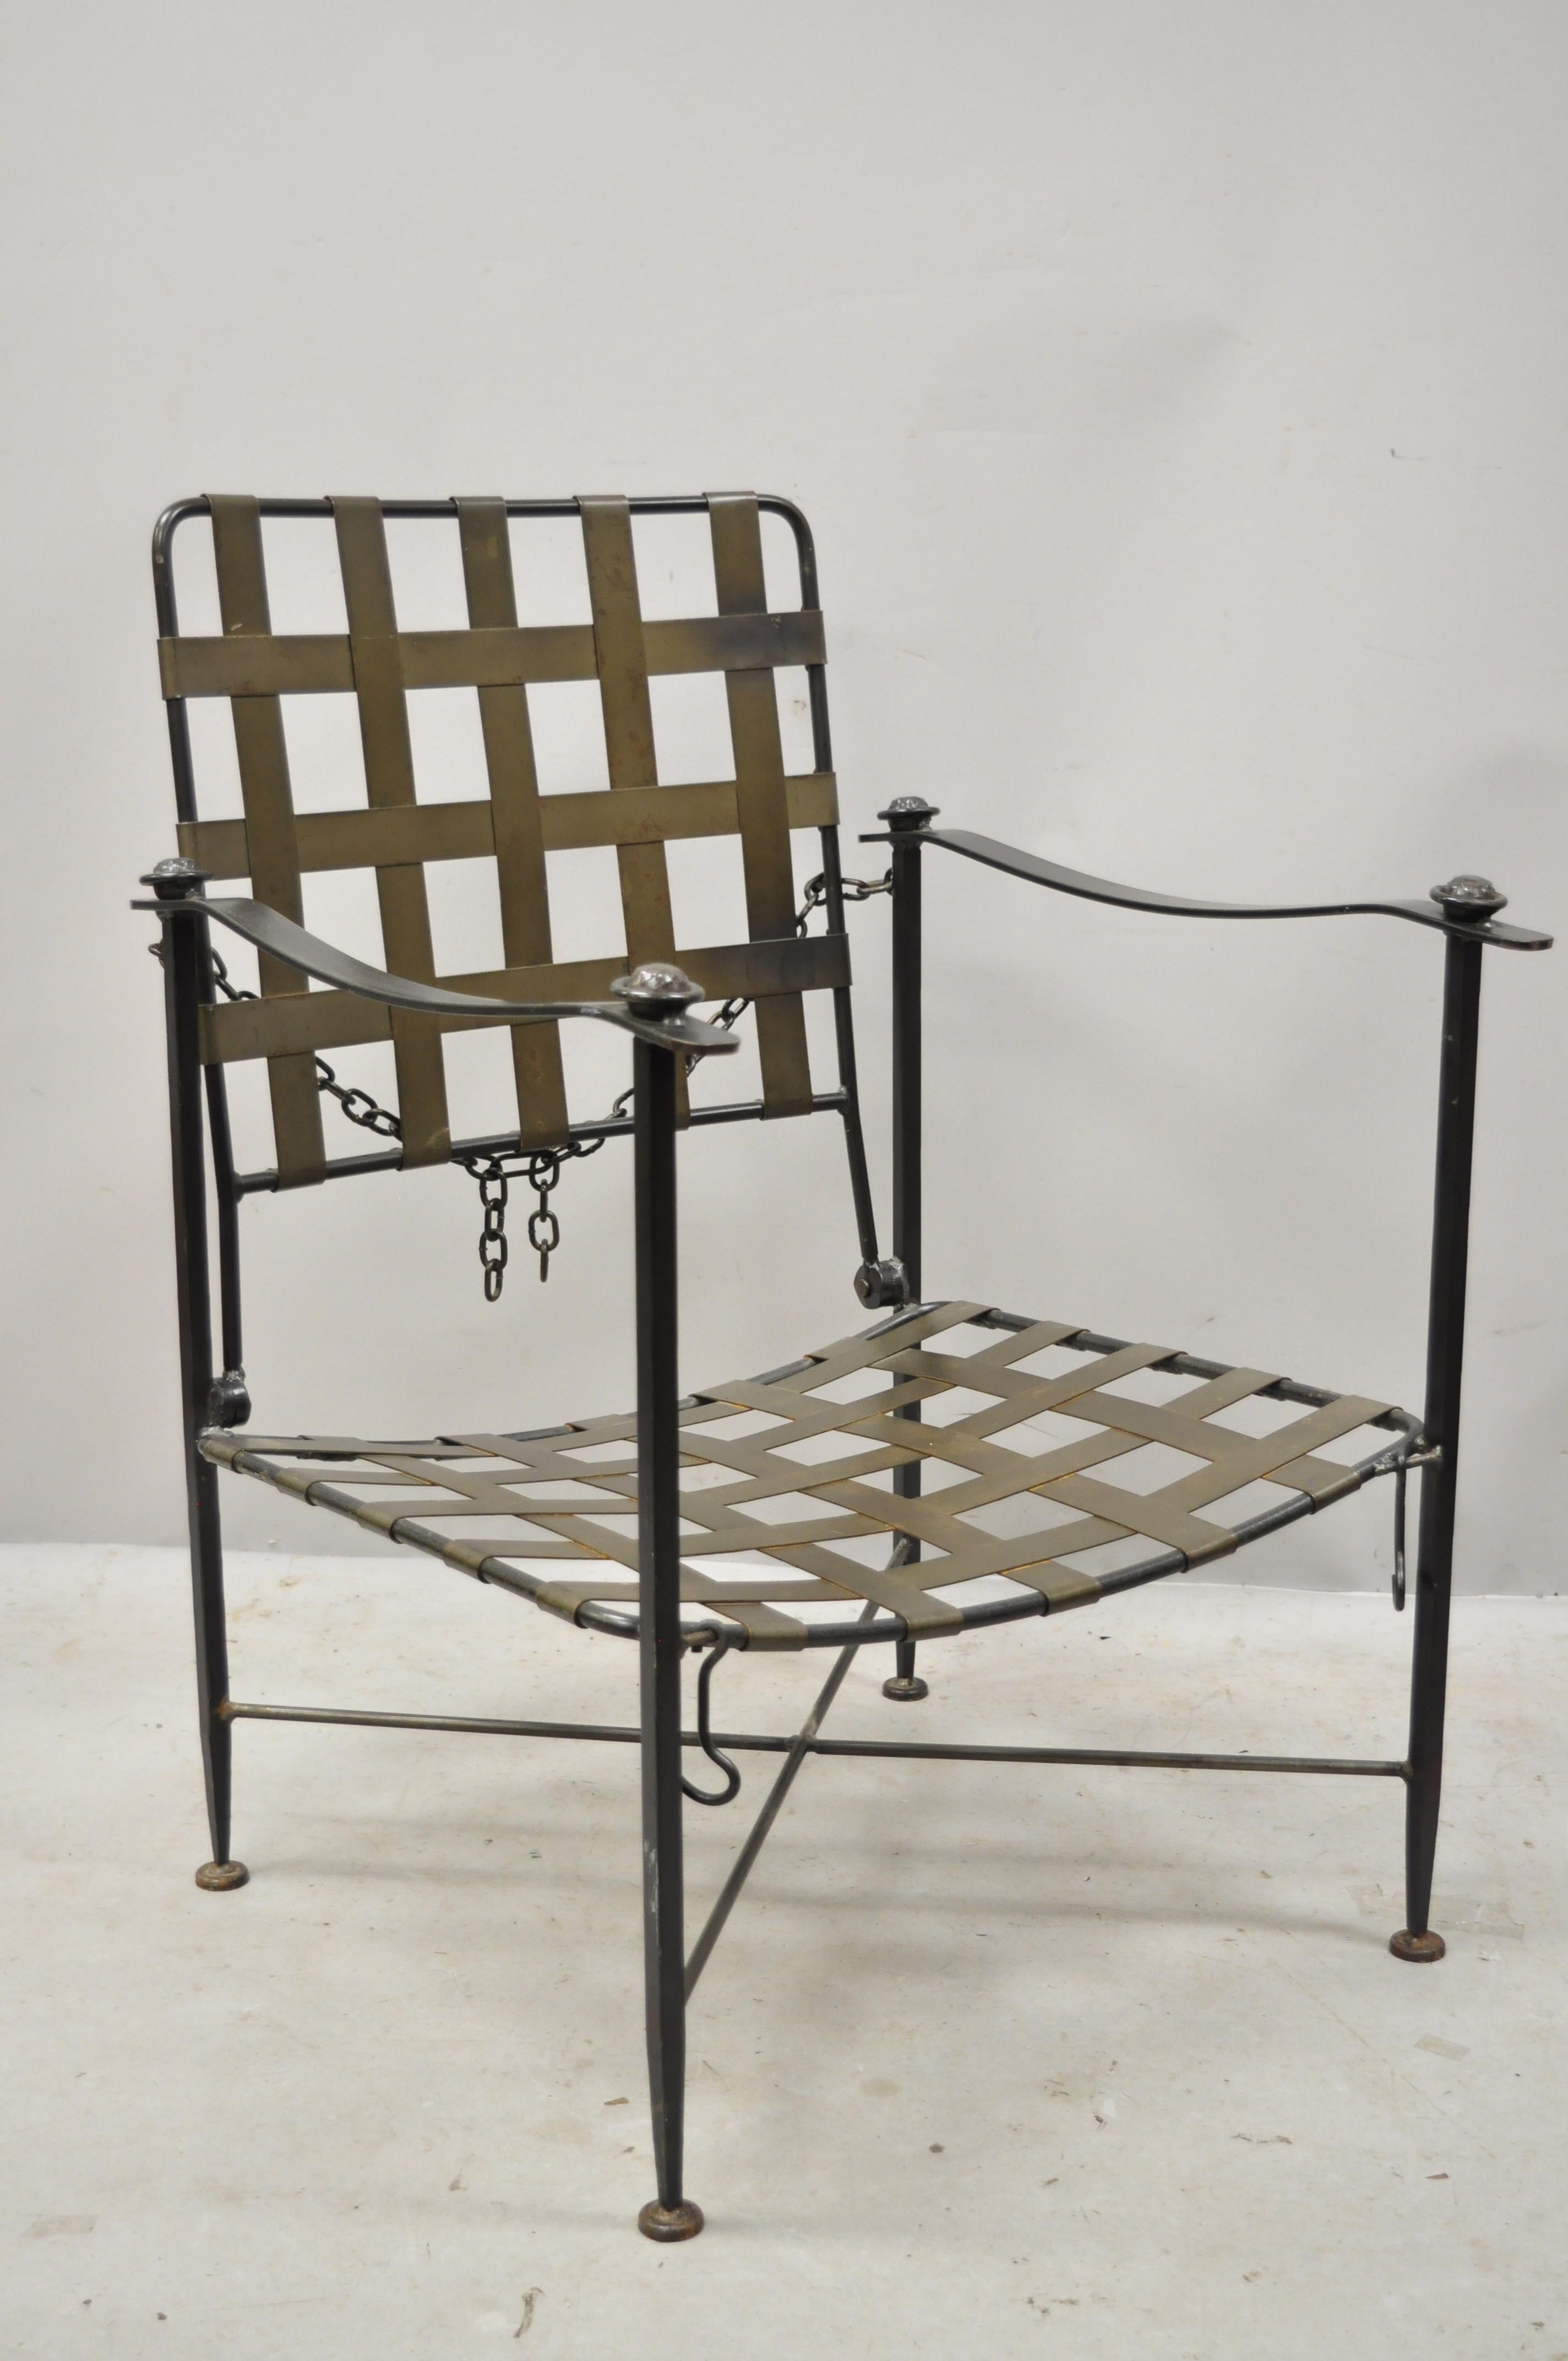 Charleston Forge Arts & Crafts Gothic heavy wrought iron adjustable lounge chair. Item features an adjustable back rest, lattice design, heavy wrought iron construction, original label, quality American craftsmanship, great style and form, circa